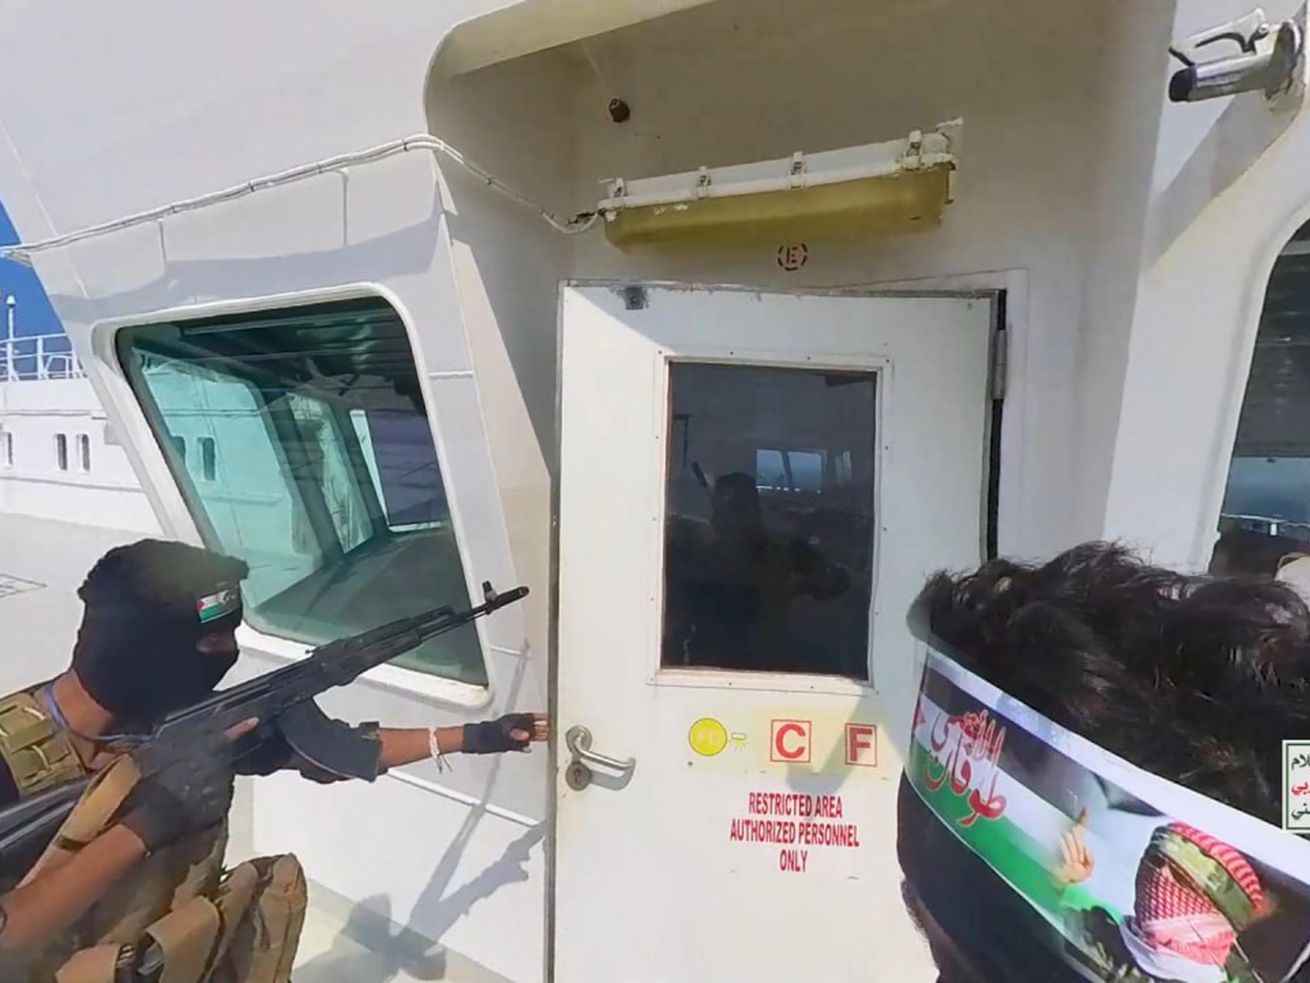 An armed man opens a door on the deck of a cargo ship.